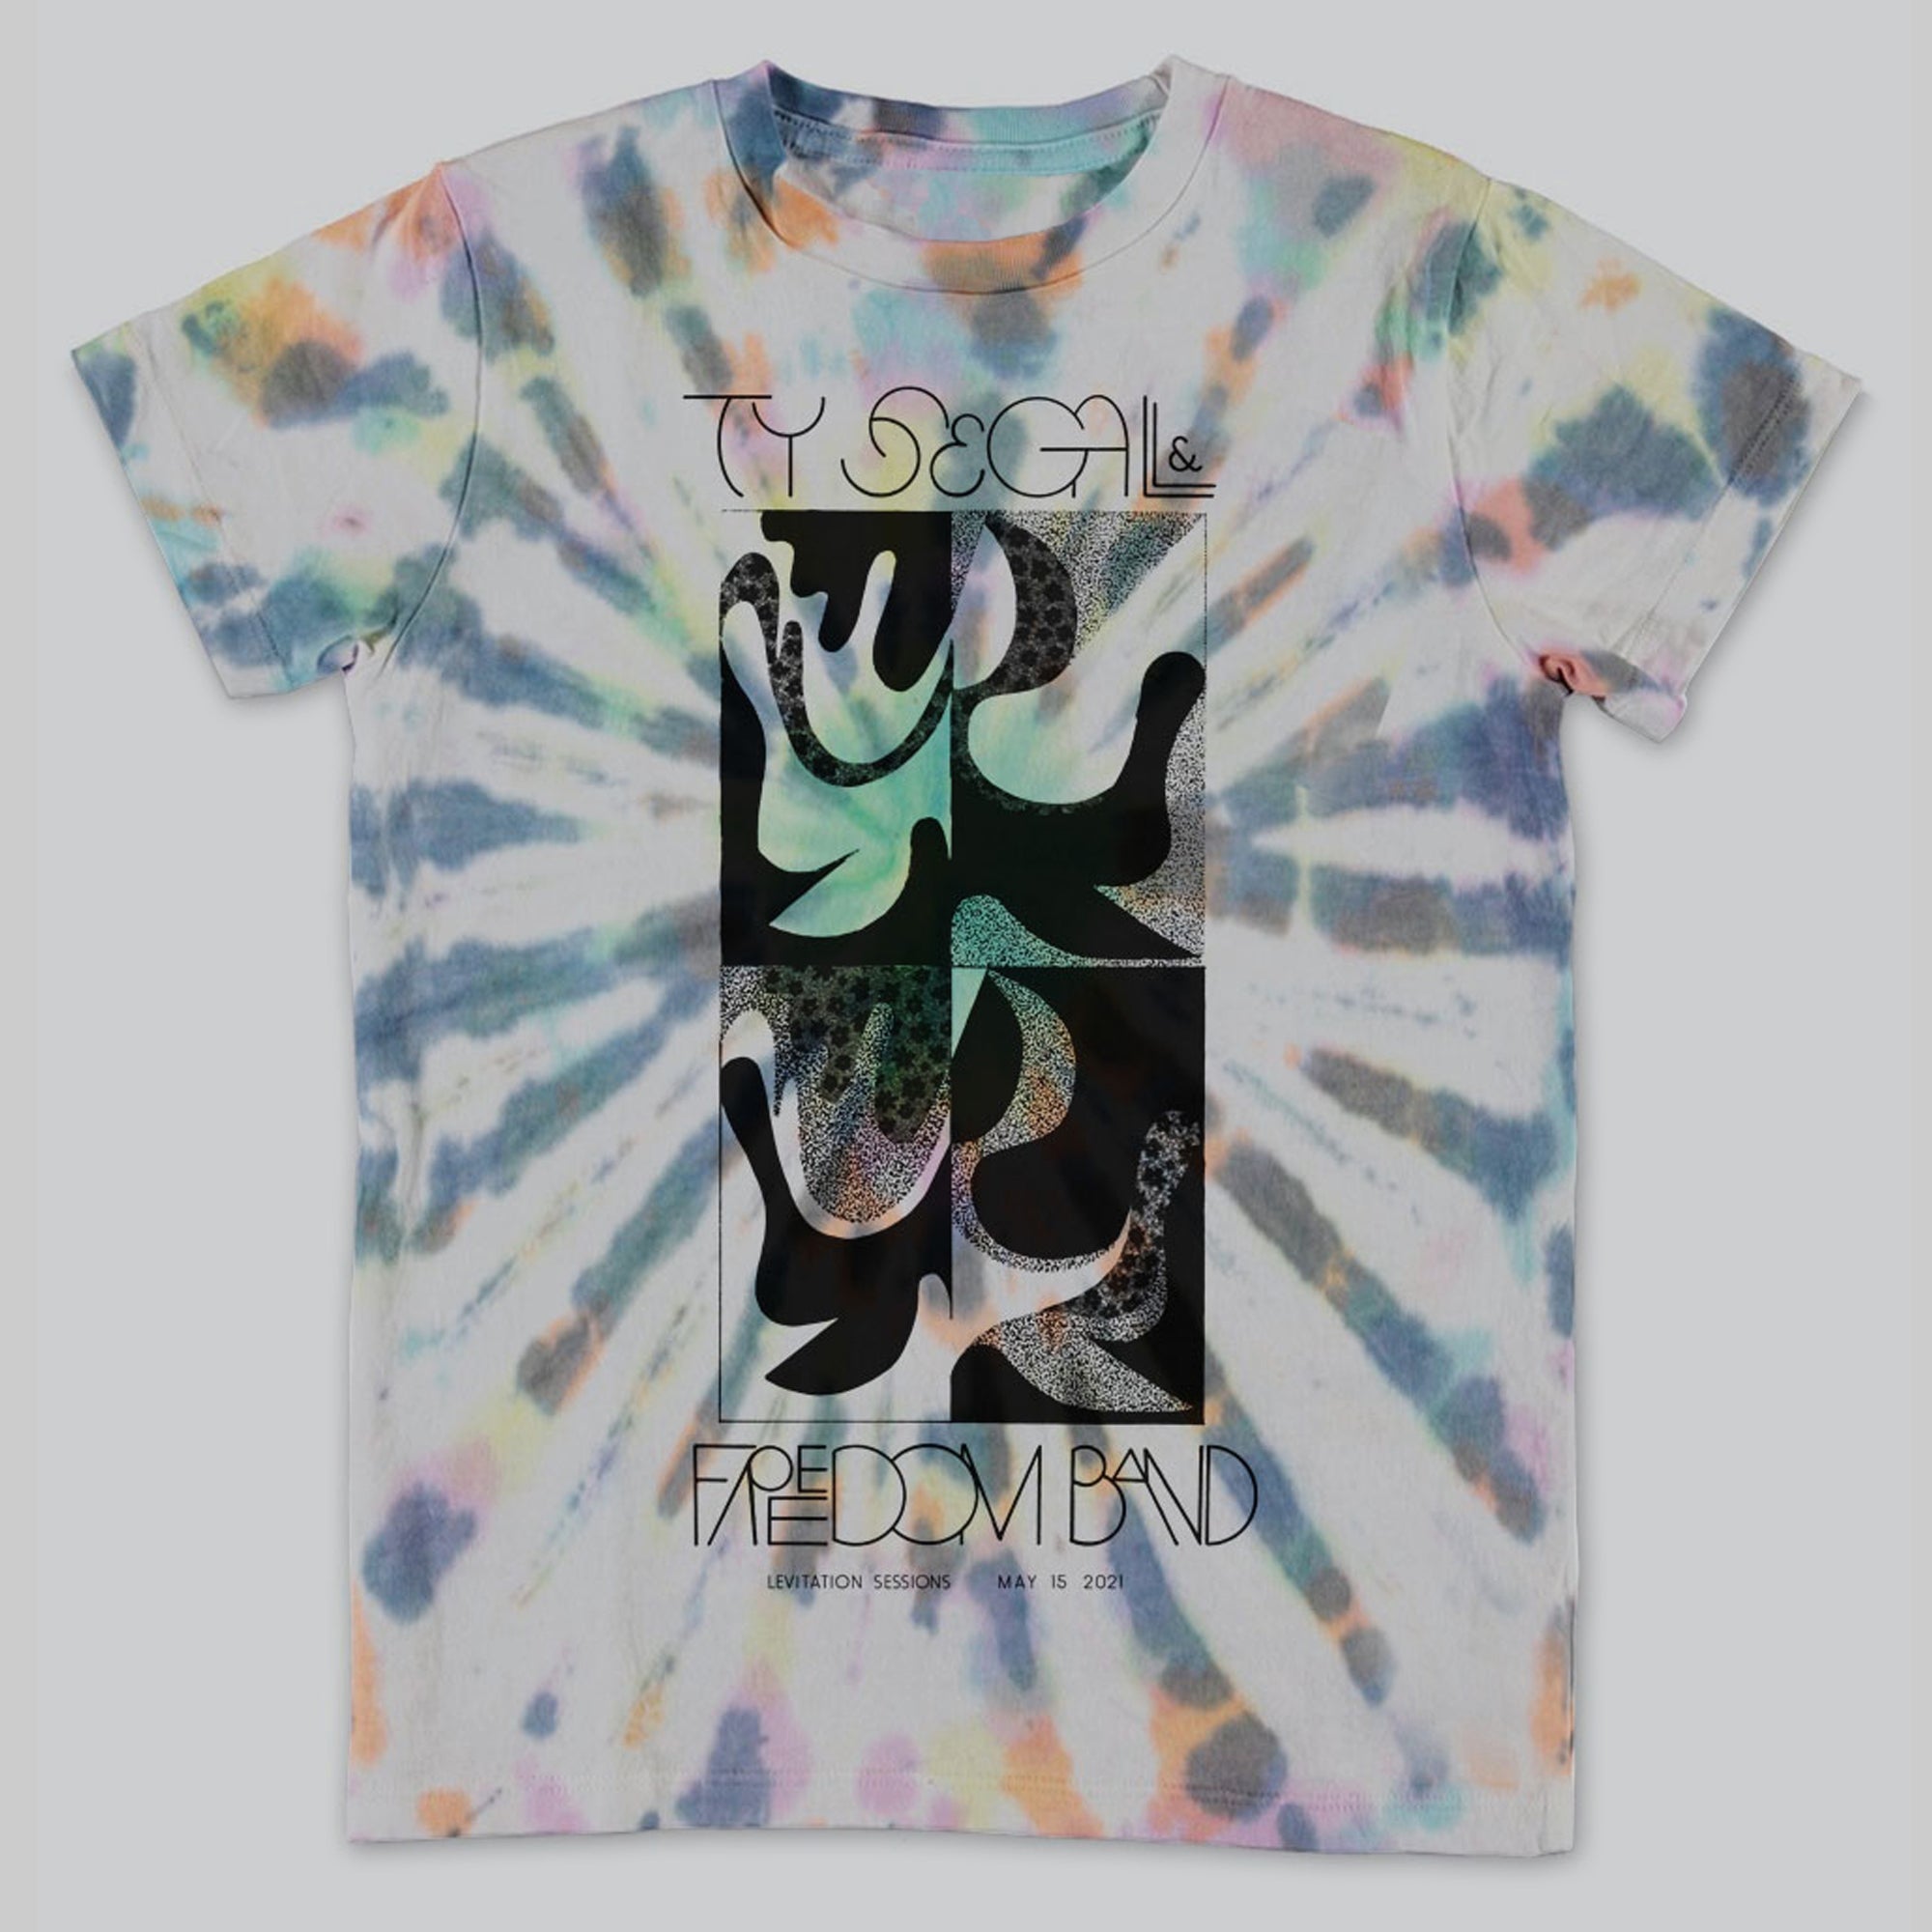 Ty Segall & Freedom Band Session Tie Dye T-Shirt – LEVITATION